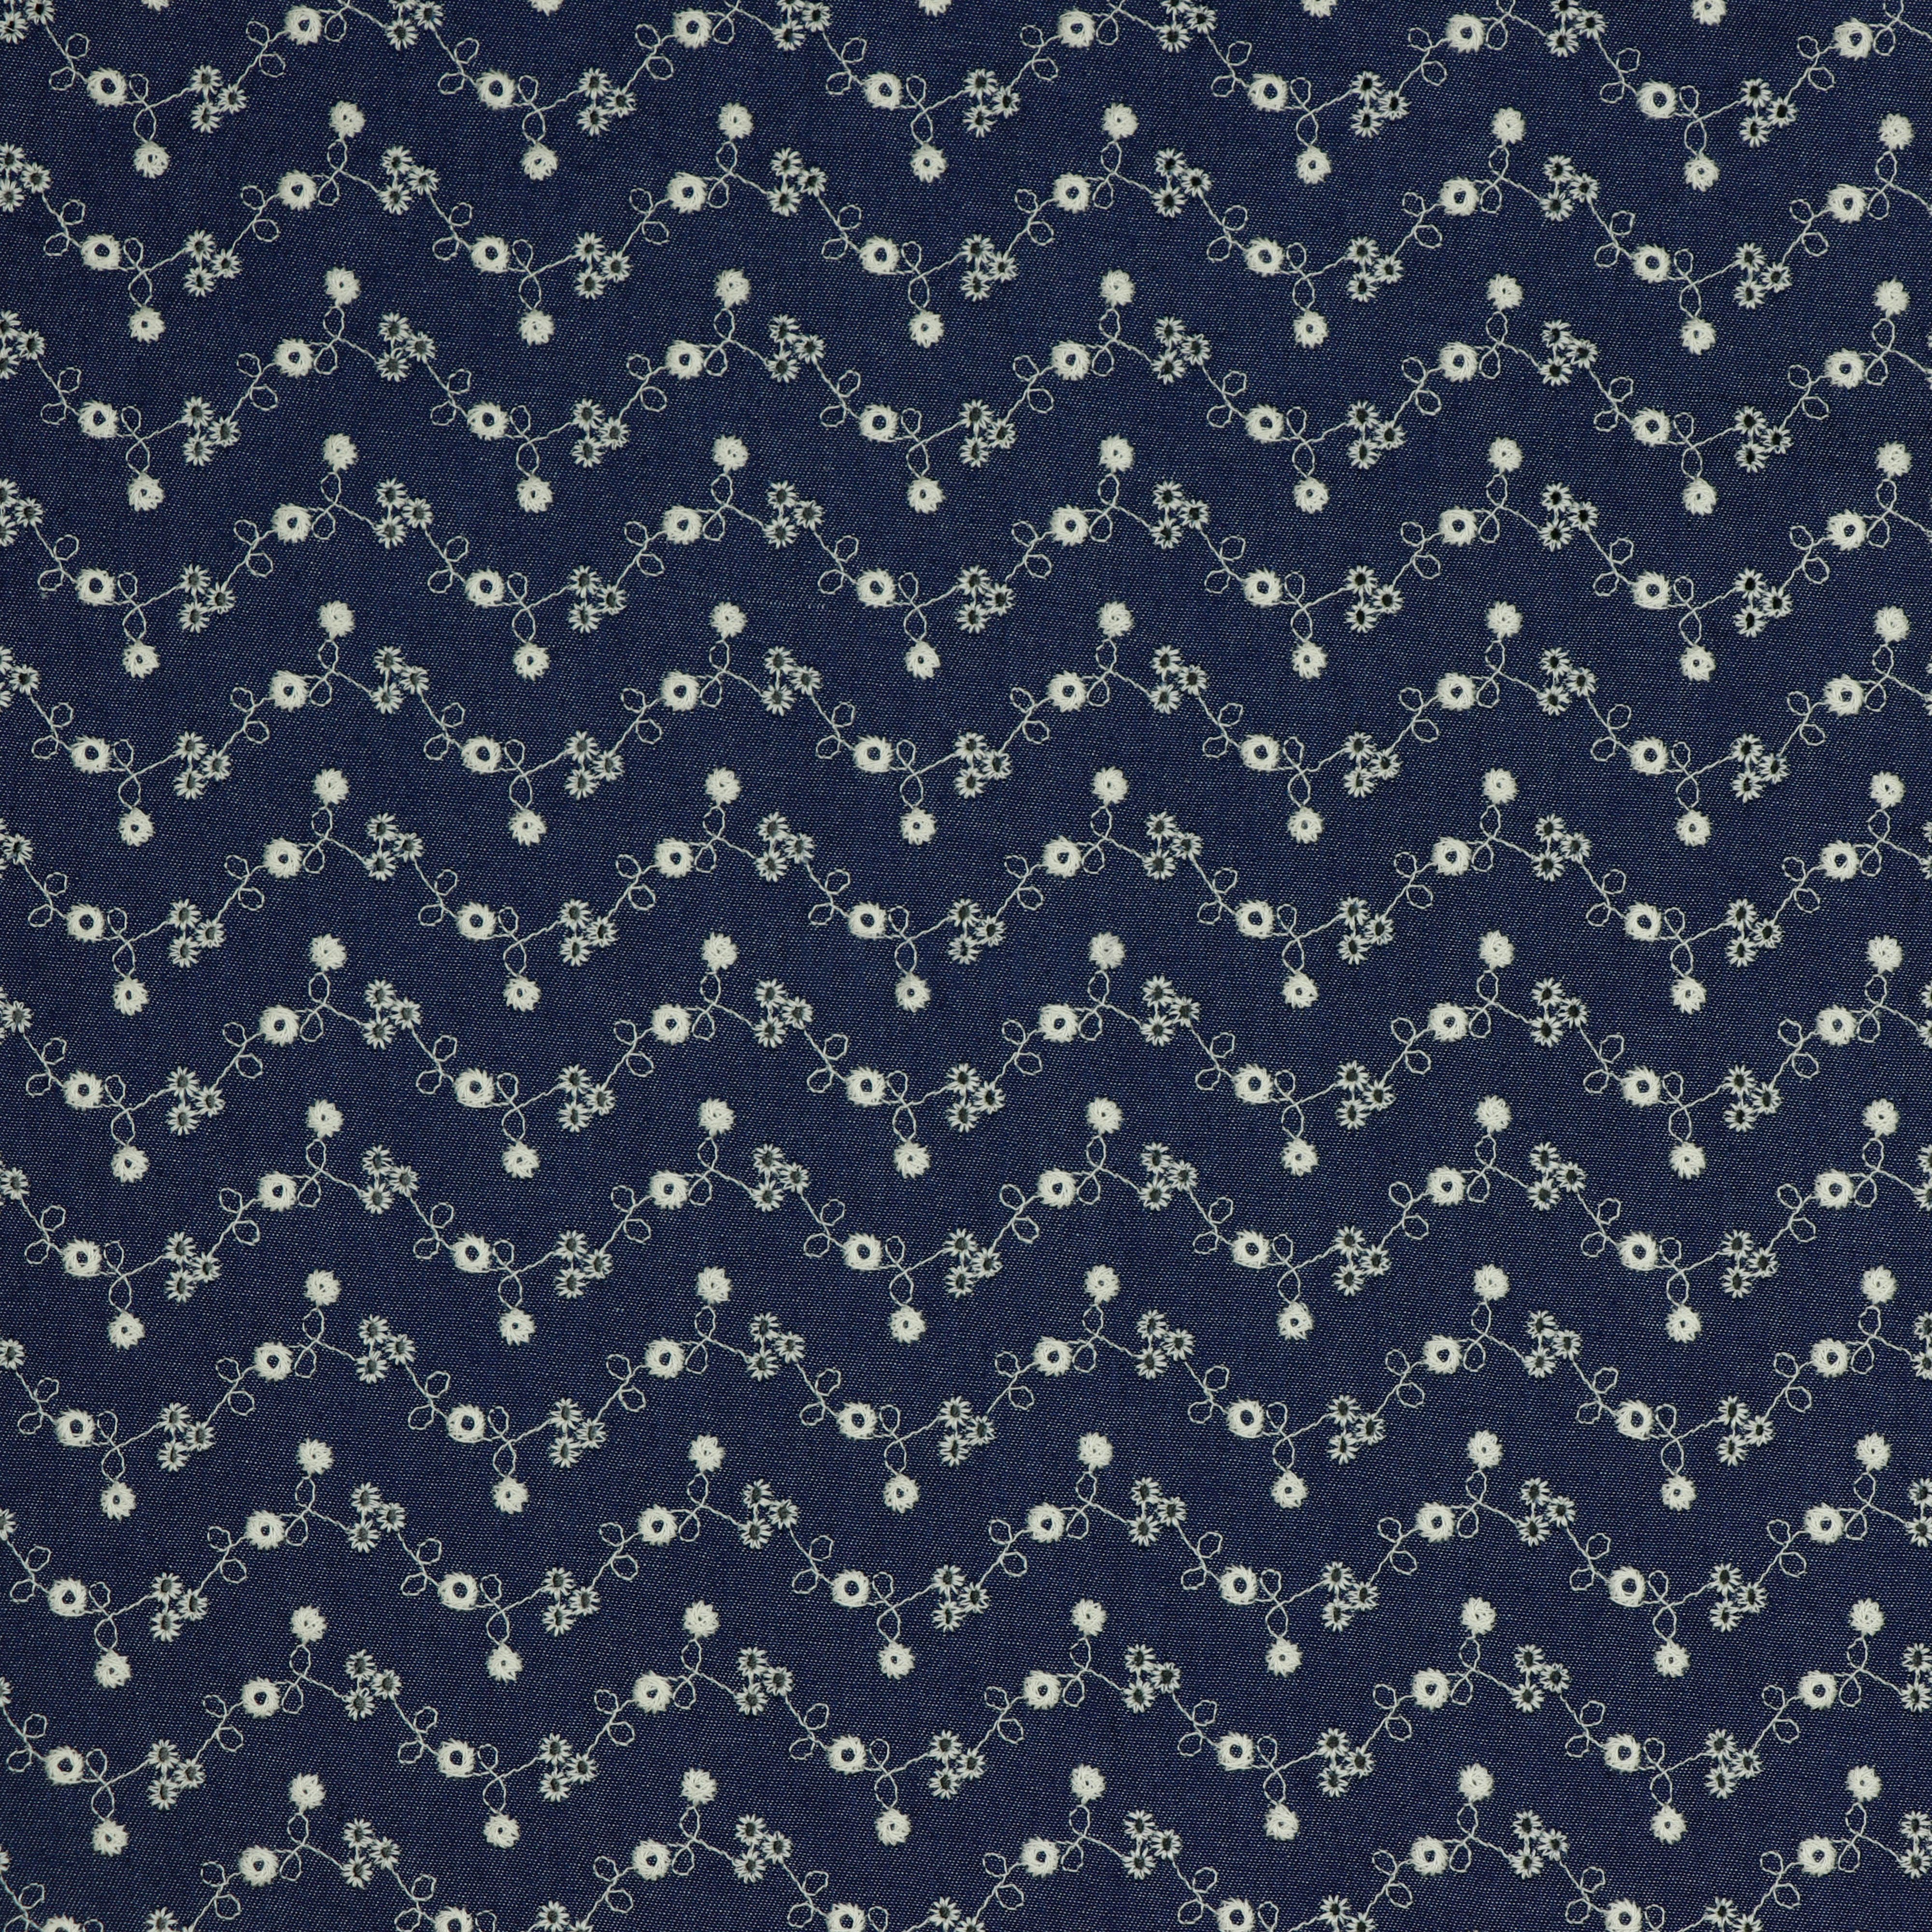 JEANS EMBROIDERY DARK BLUE (high resolution)